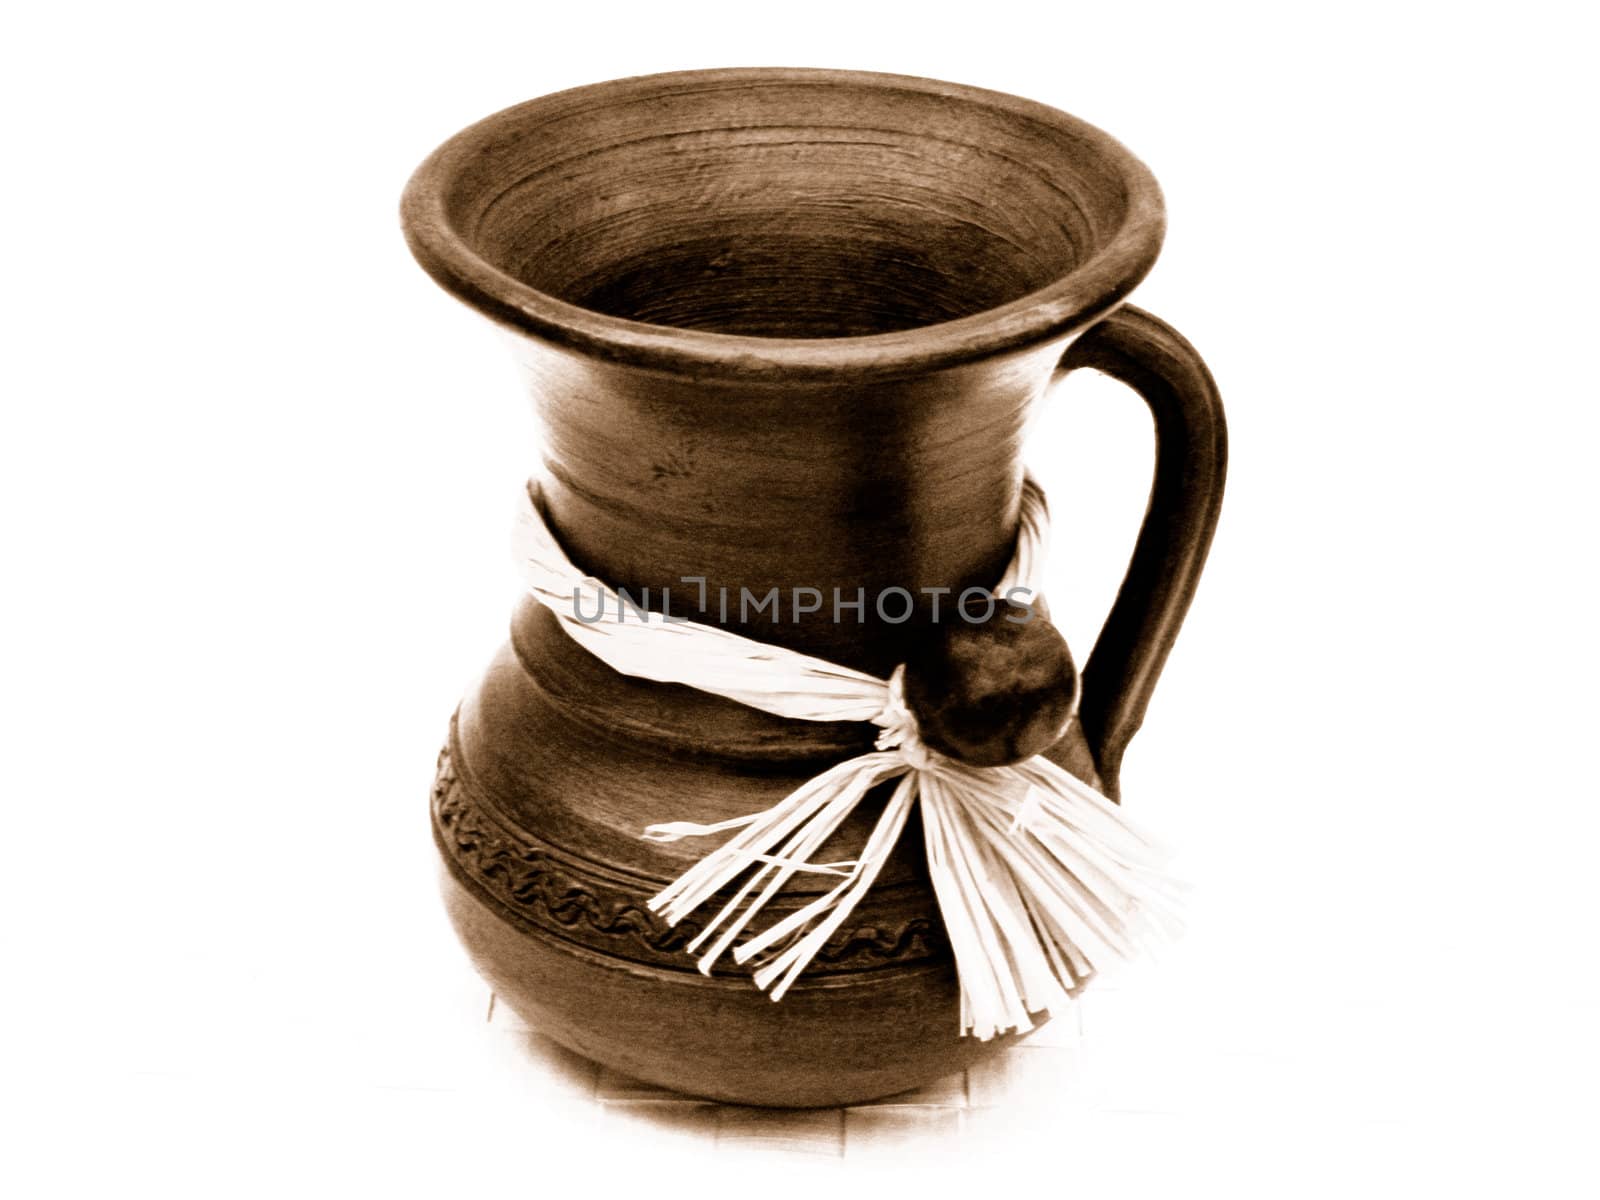 Single jug from wood with handle on white background.